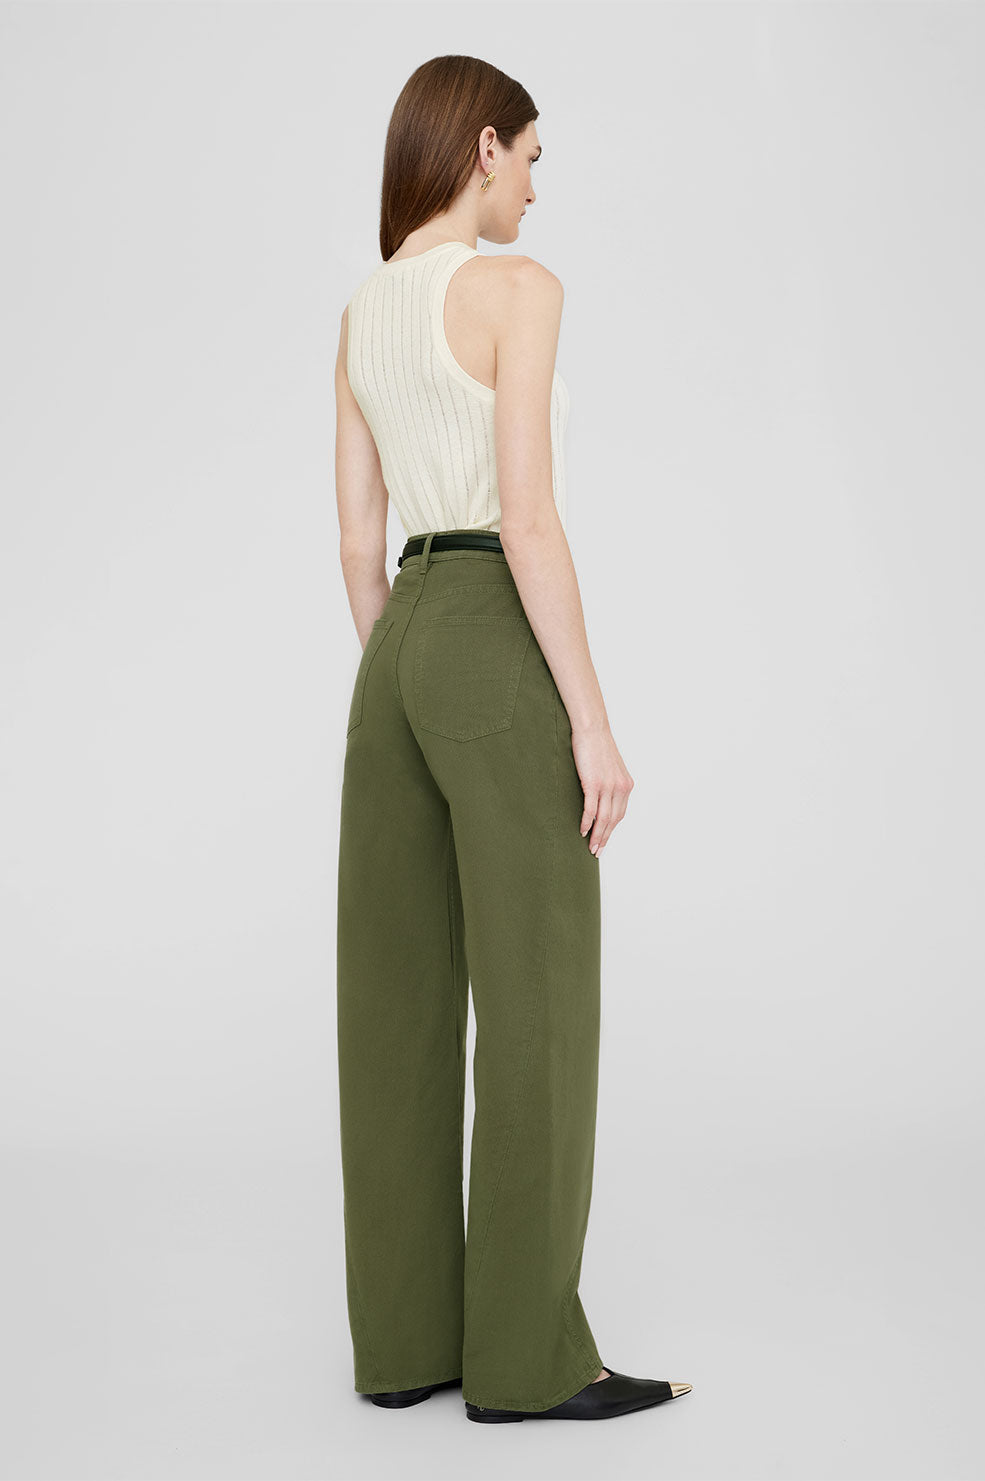 ANINE BING Briley Pant - Army Green - On Model Back